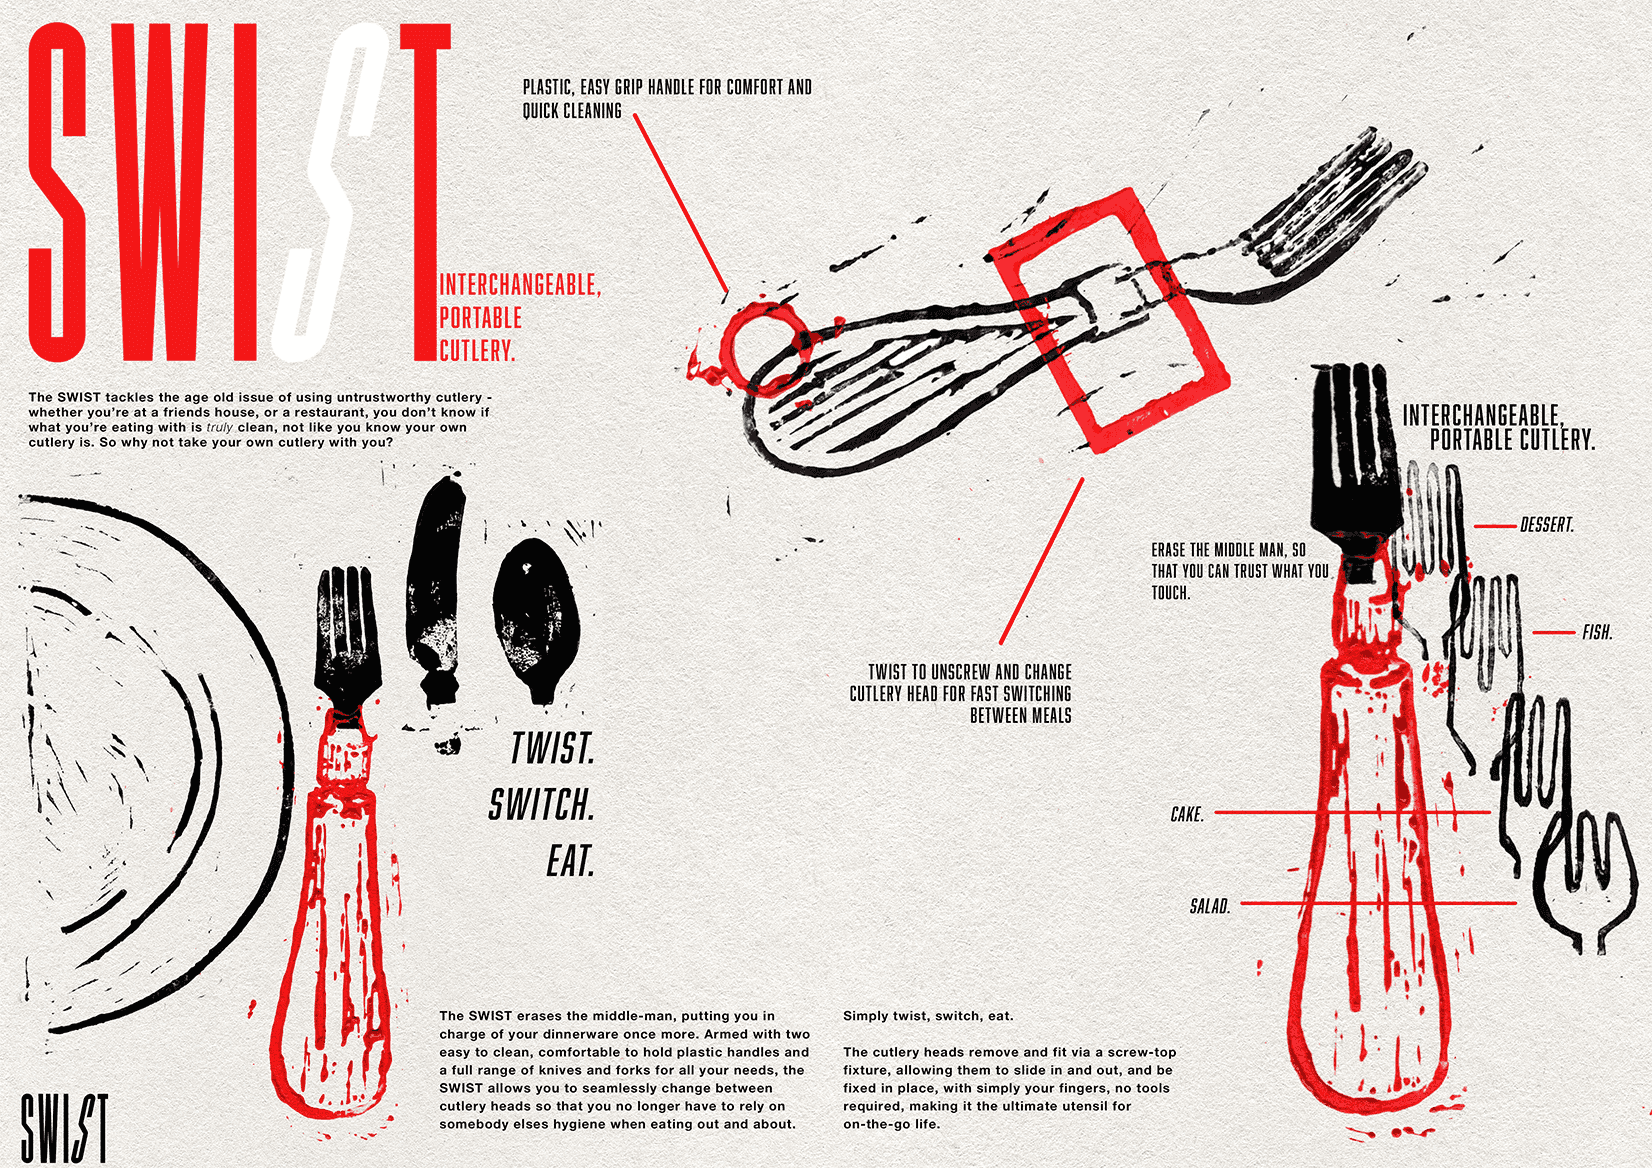 Product layout for the 'SWIST' - a product designed and envisioned to solve the OCD based anxiety of using cutlery from places where hygiene practices are unknown.